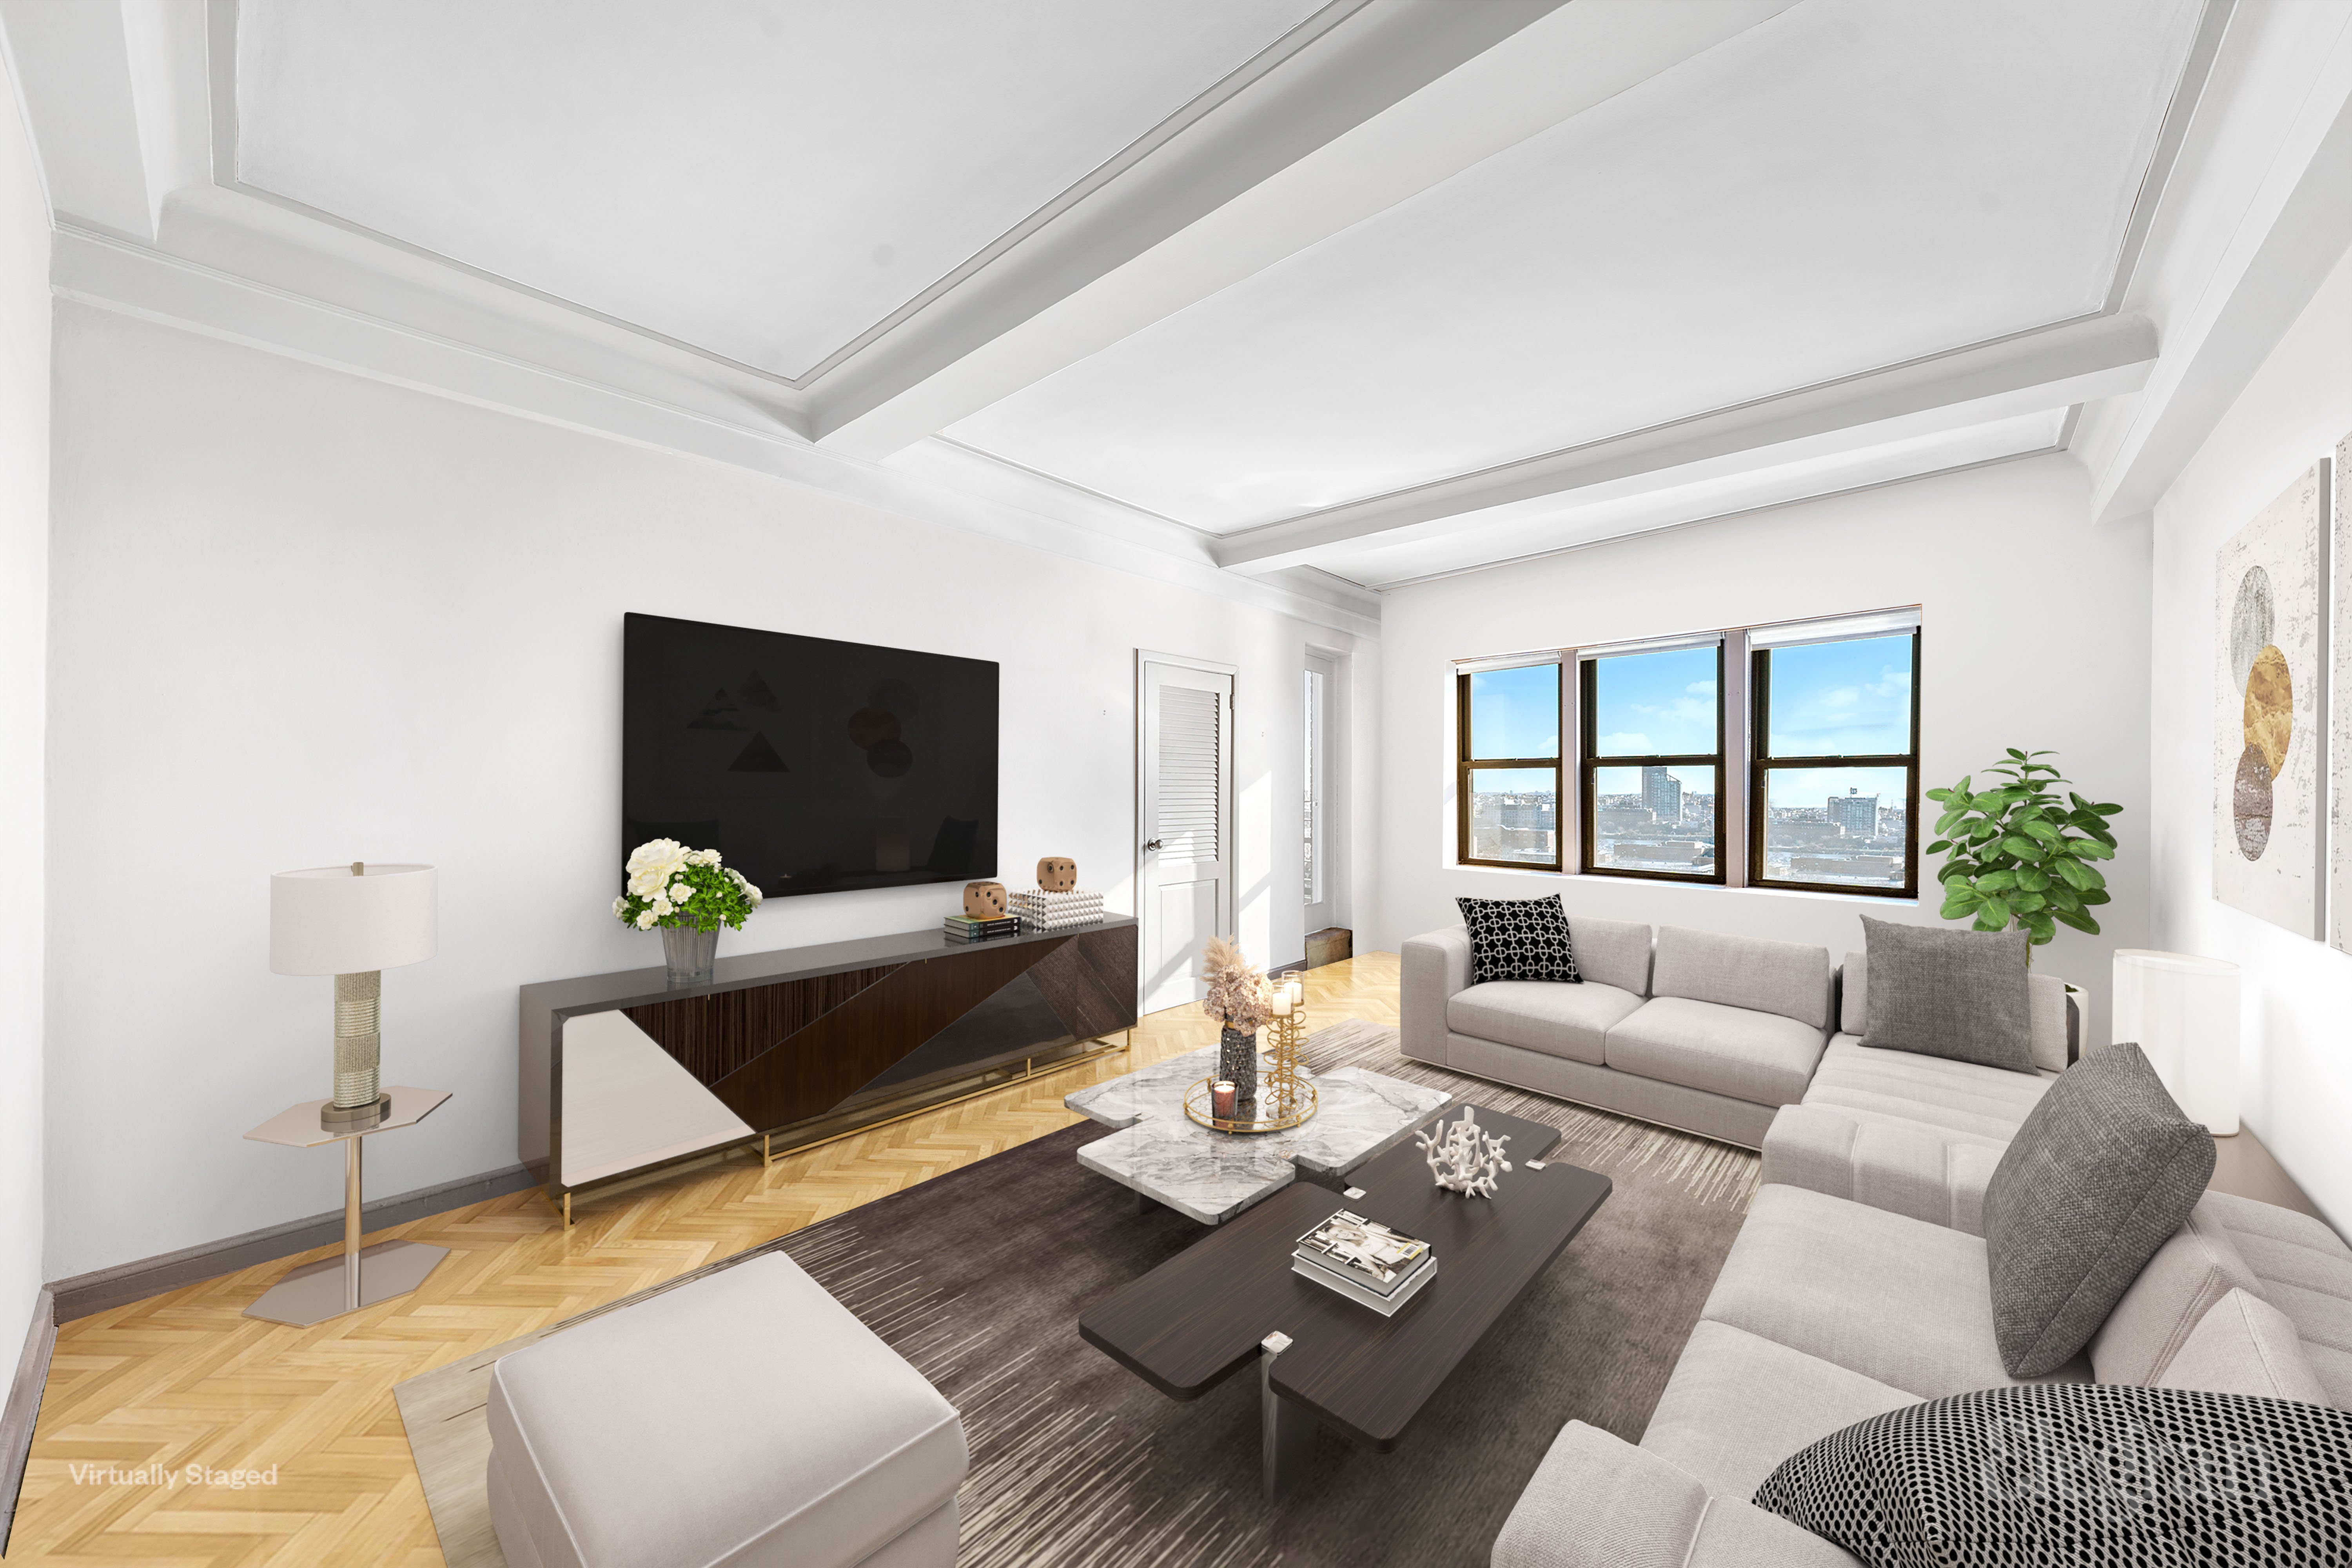 33 East End Avenue 12-A, Upper East Side, Upper East Side, NYC - 2 Bedrooms  
2 Bathrooms  
6 Rooms - 